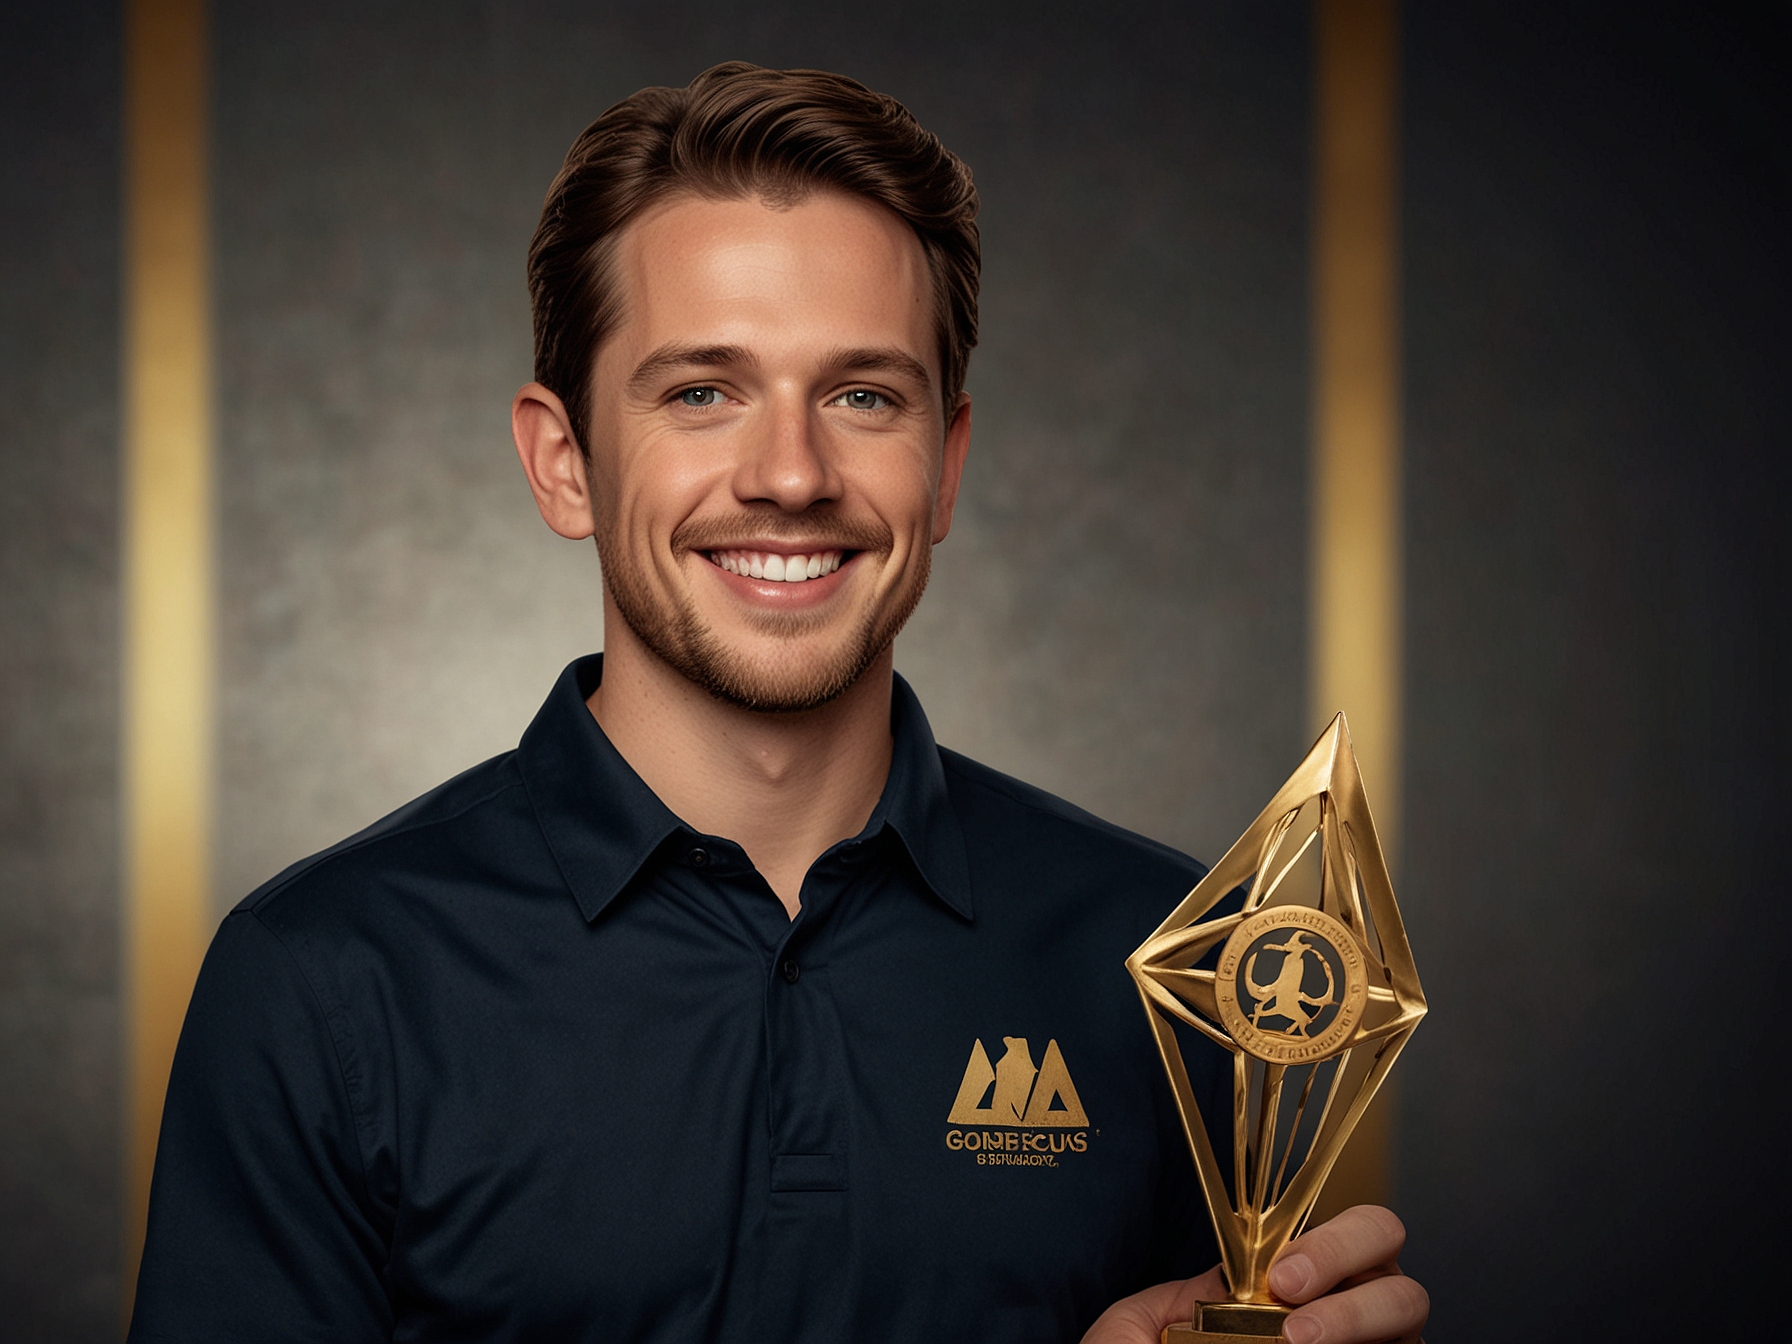 Charlie Condon holding the Golden Spikes Award trophy, smiling and standing in front of a backdrop with the award's logo prominently displayed.